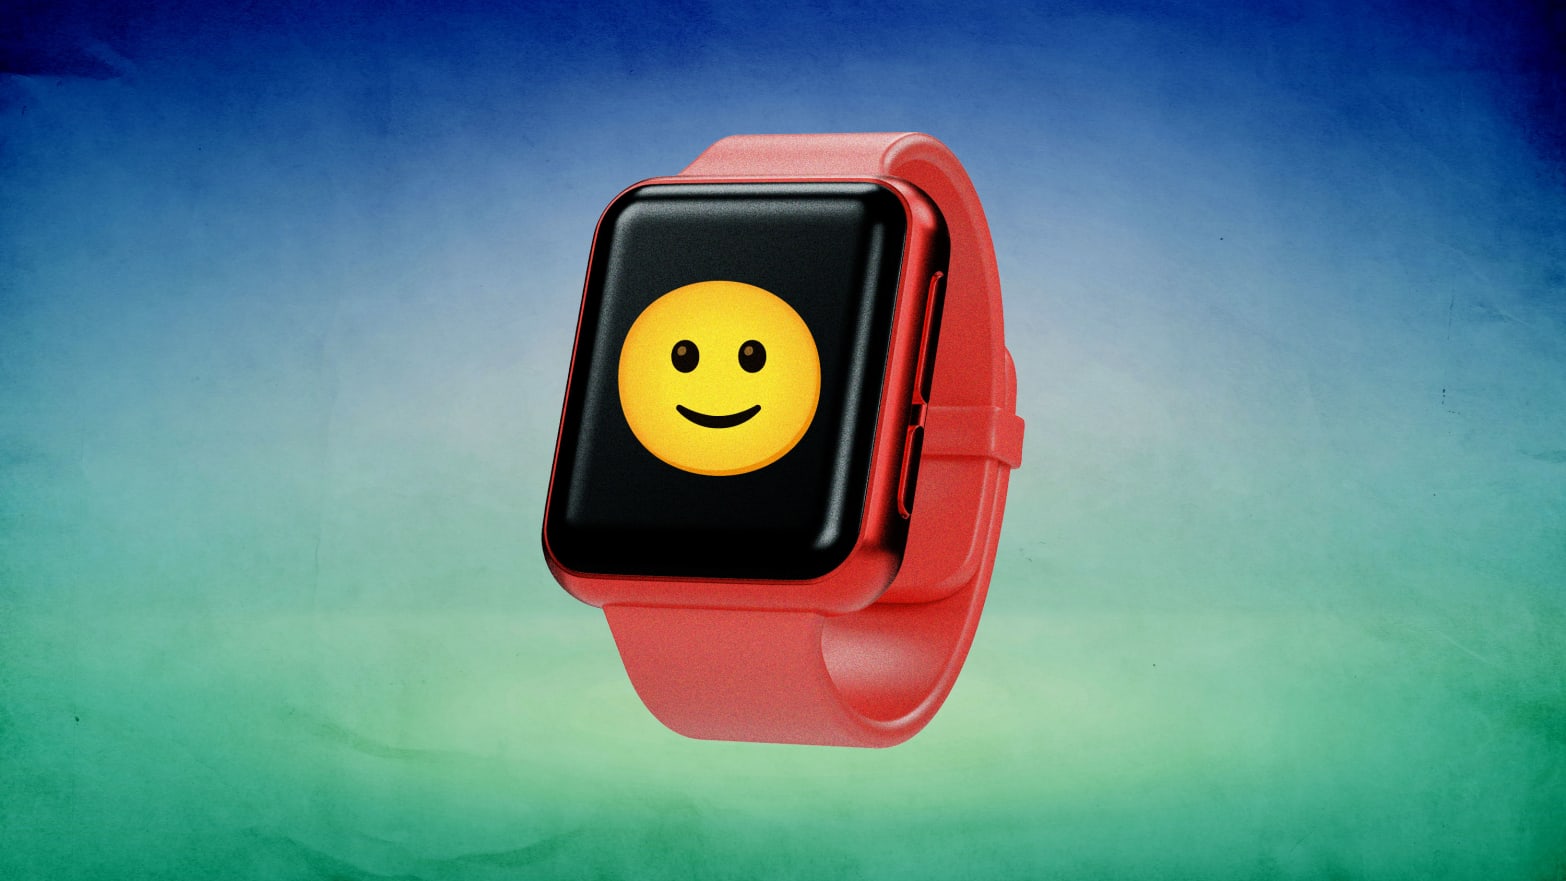 An illustration including a Smart Watch and a Blue gradient textured background